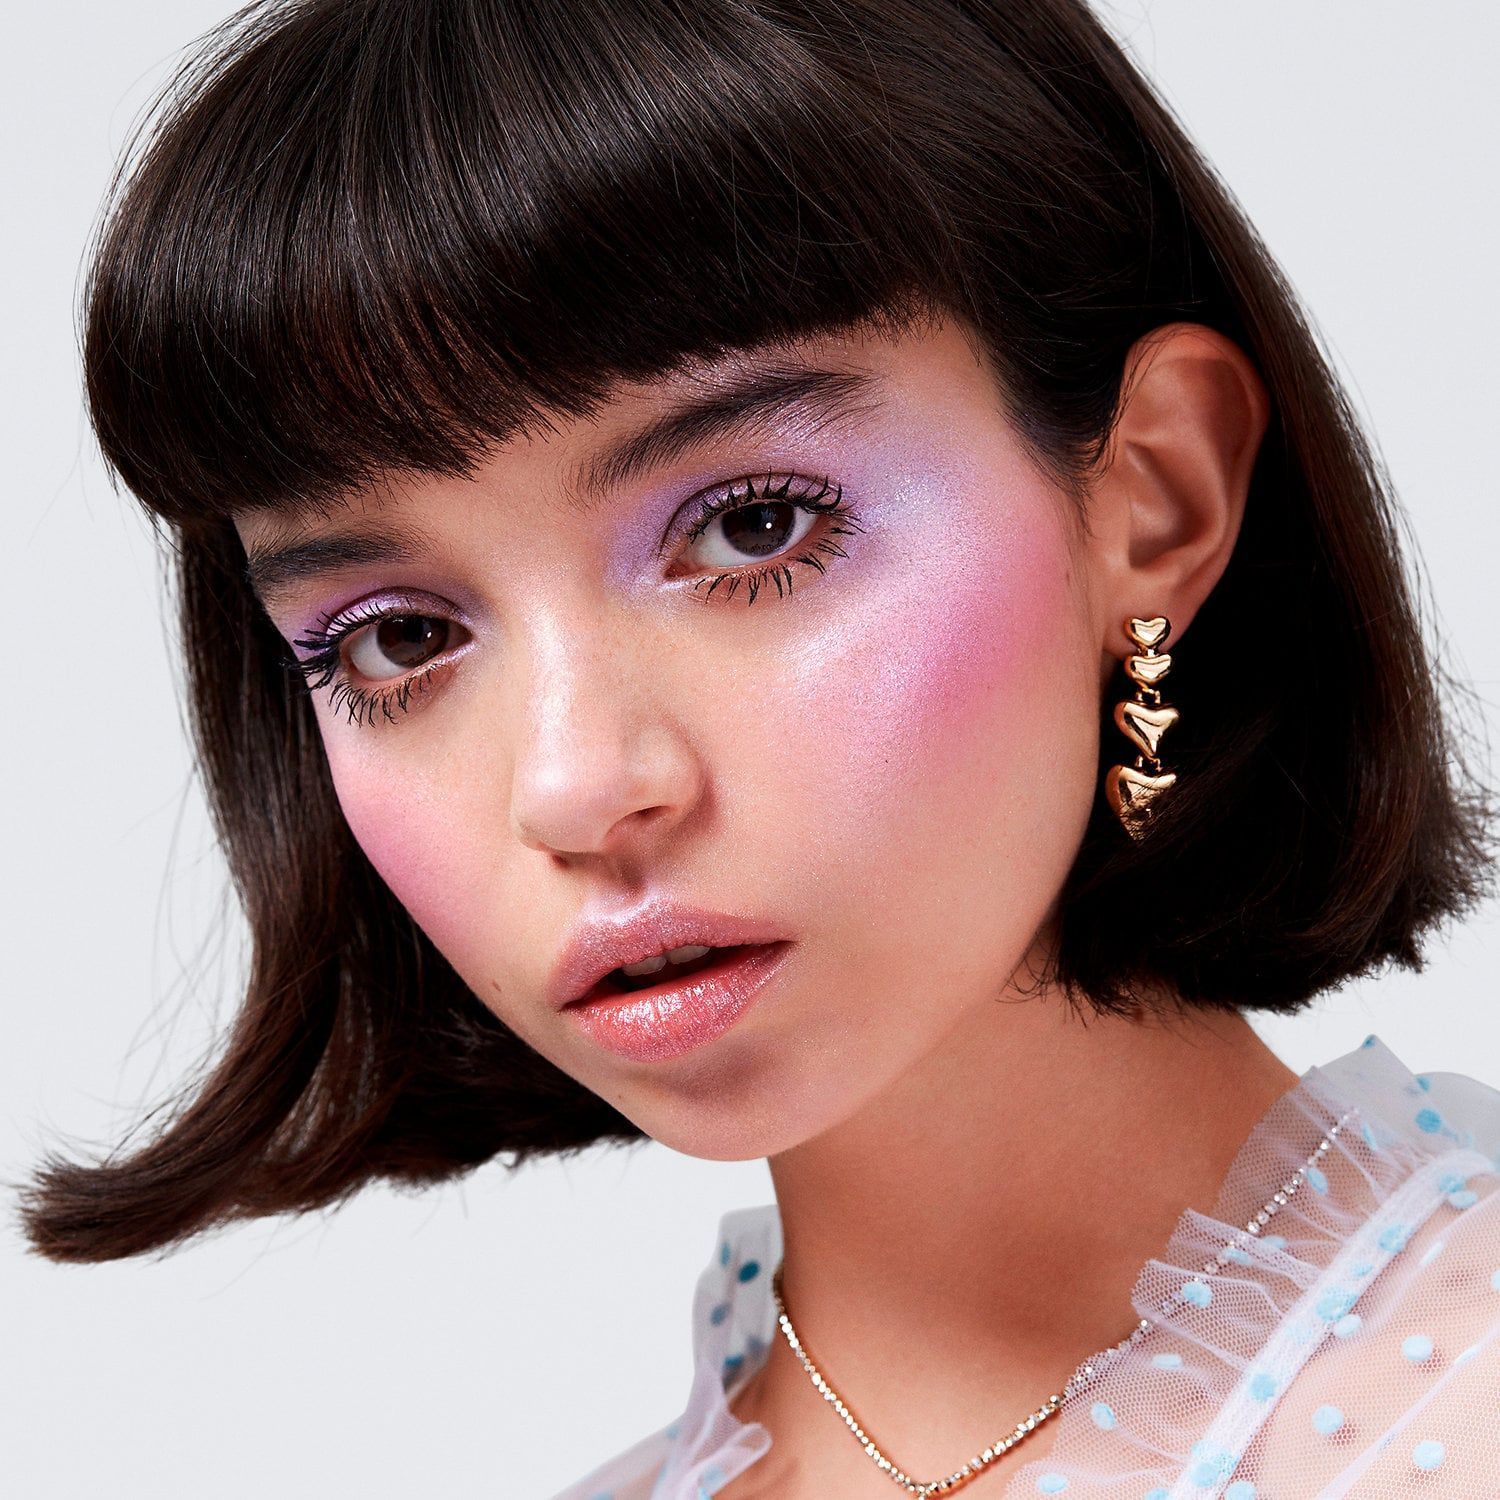 Holographic Stick -   15 70s beauty Editorial ideas